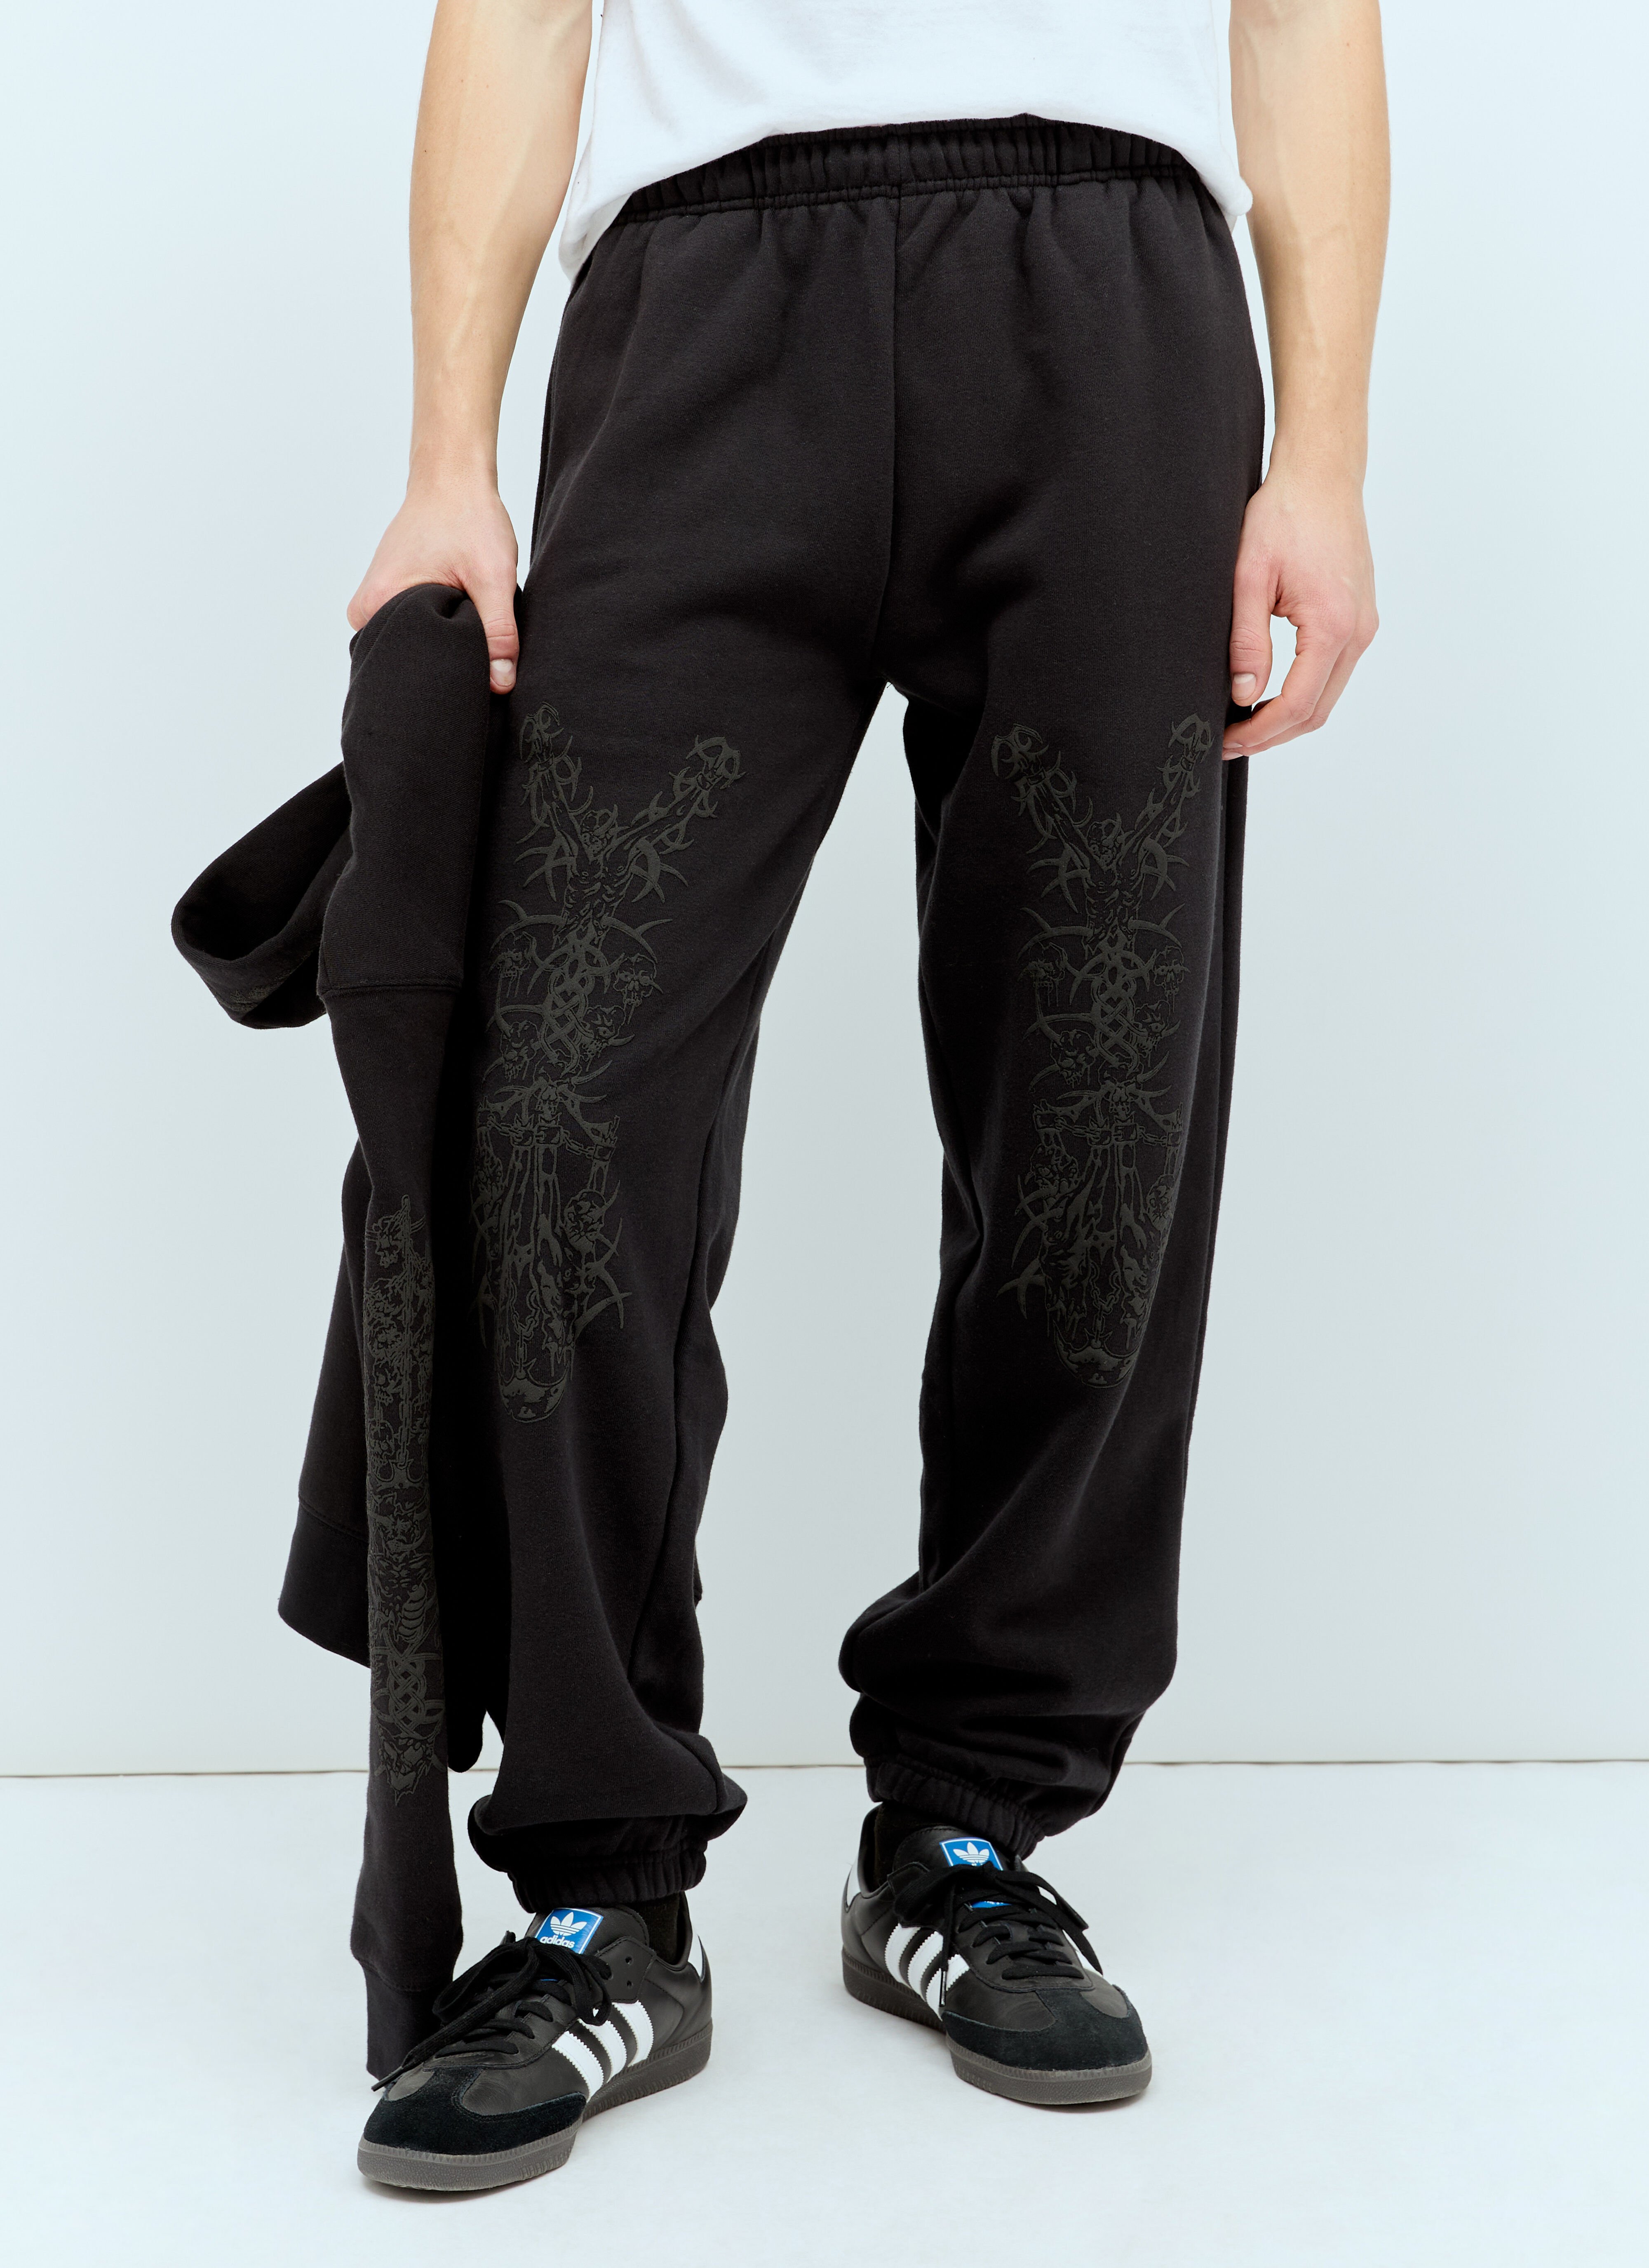 Lanvin Pain And Suffering Track Pants Black lnv0154006